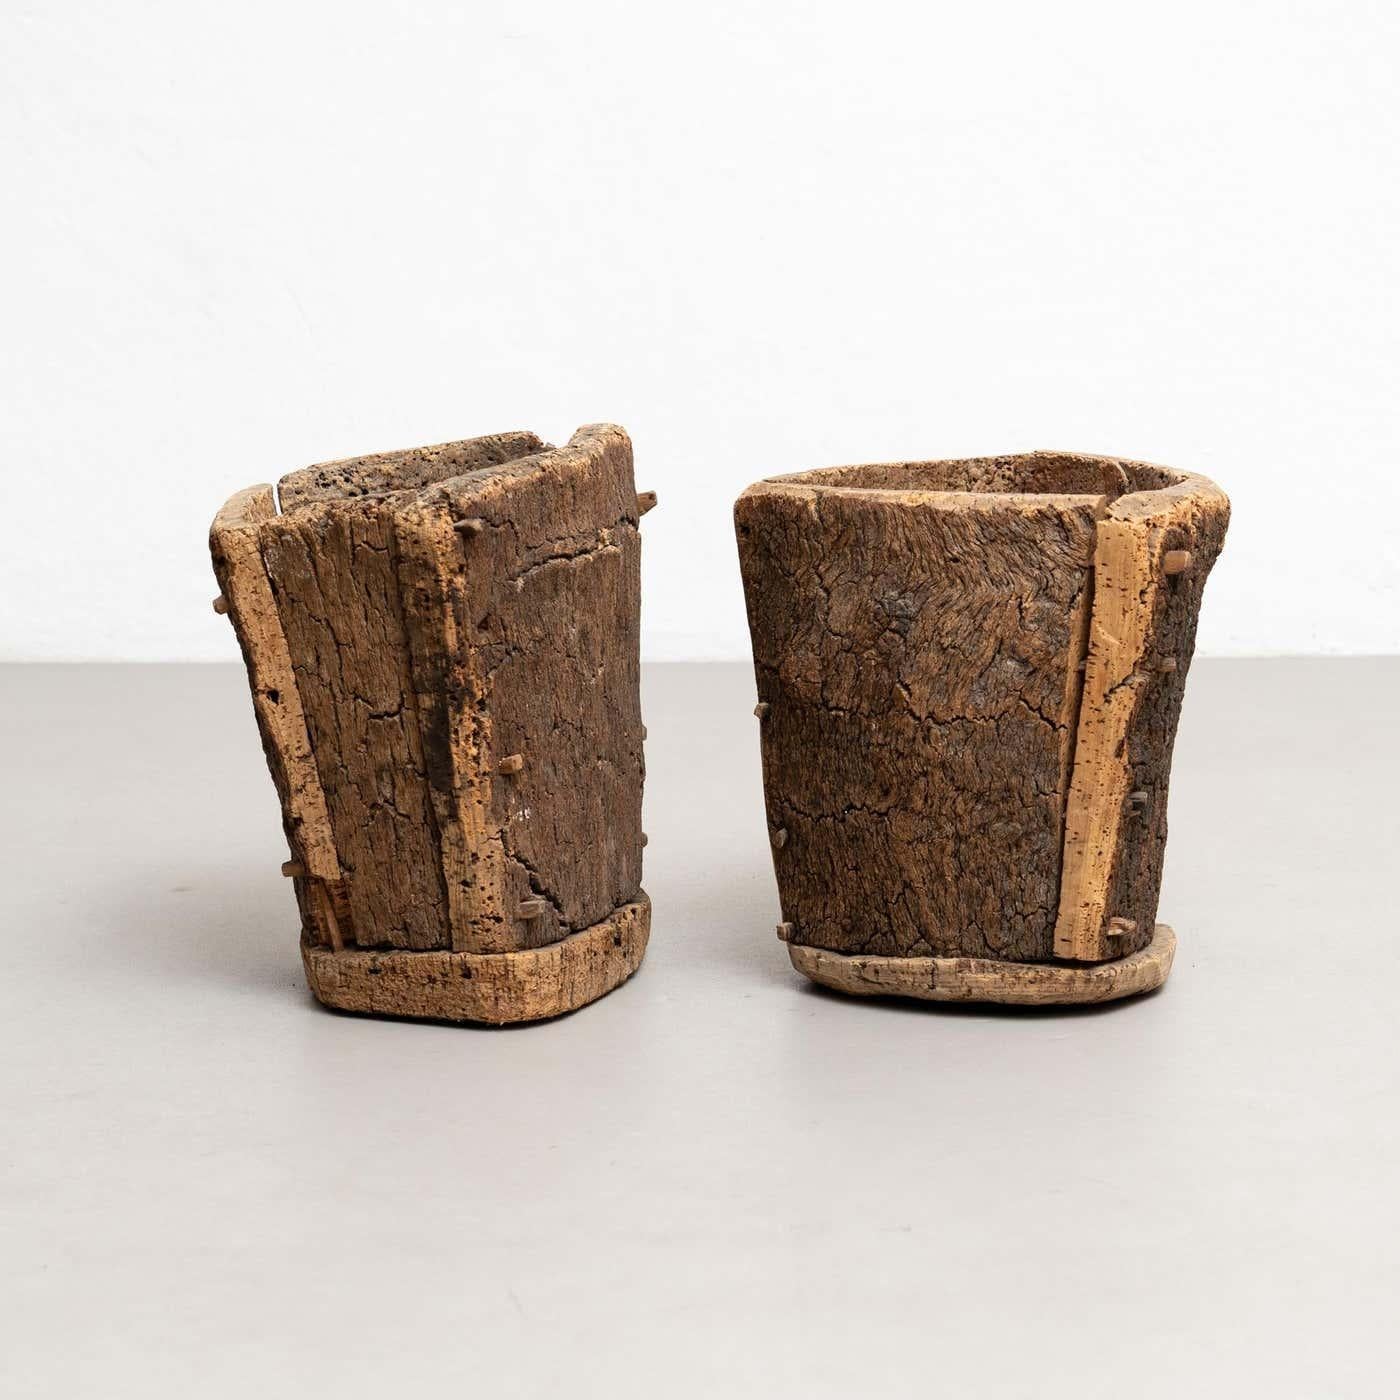 Mid-Century Modern Brutalist Romance: Pair of Vintage Cork Trash Bins from the Early 20th Century For Sale